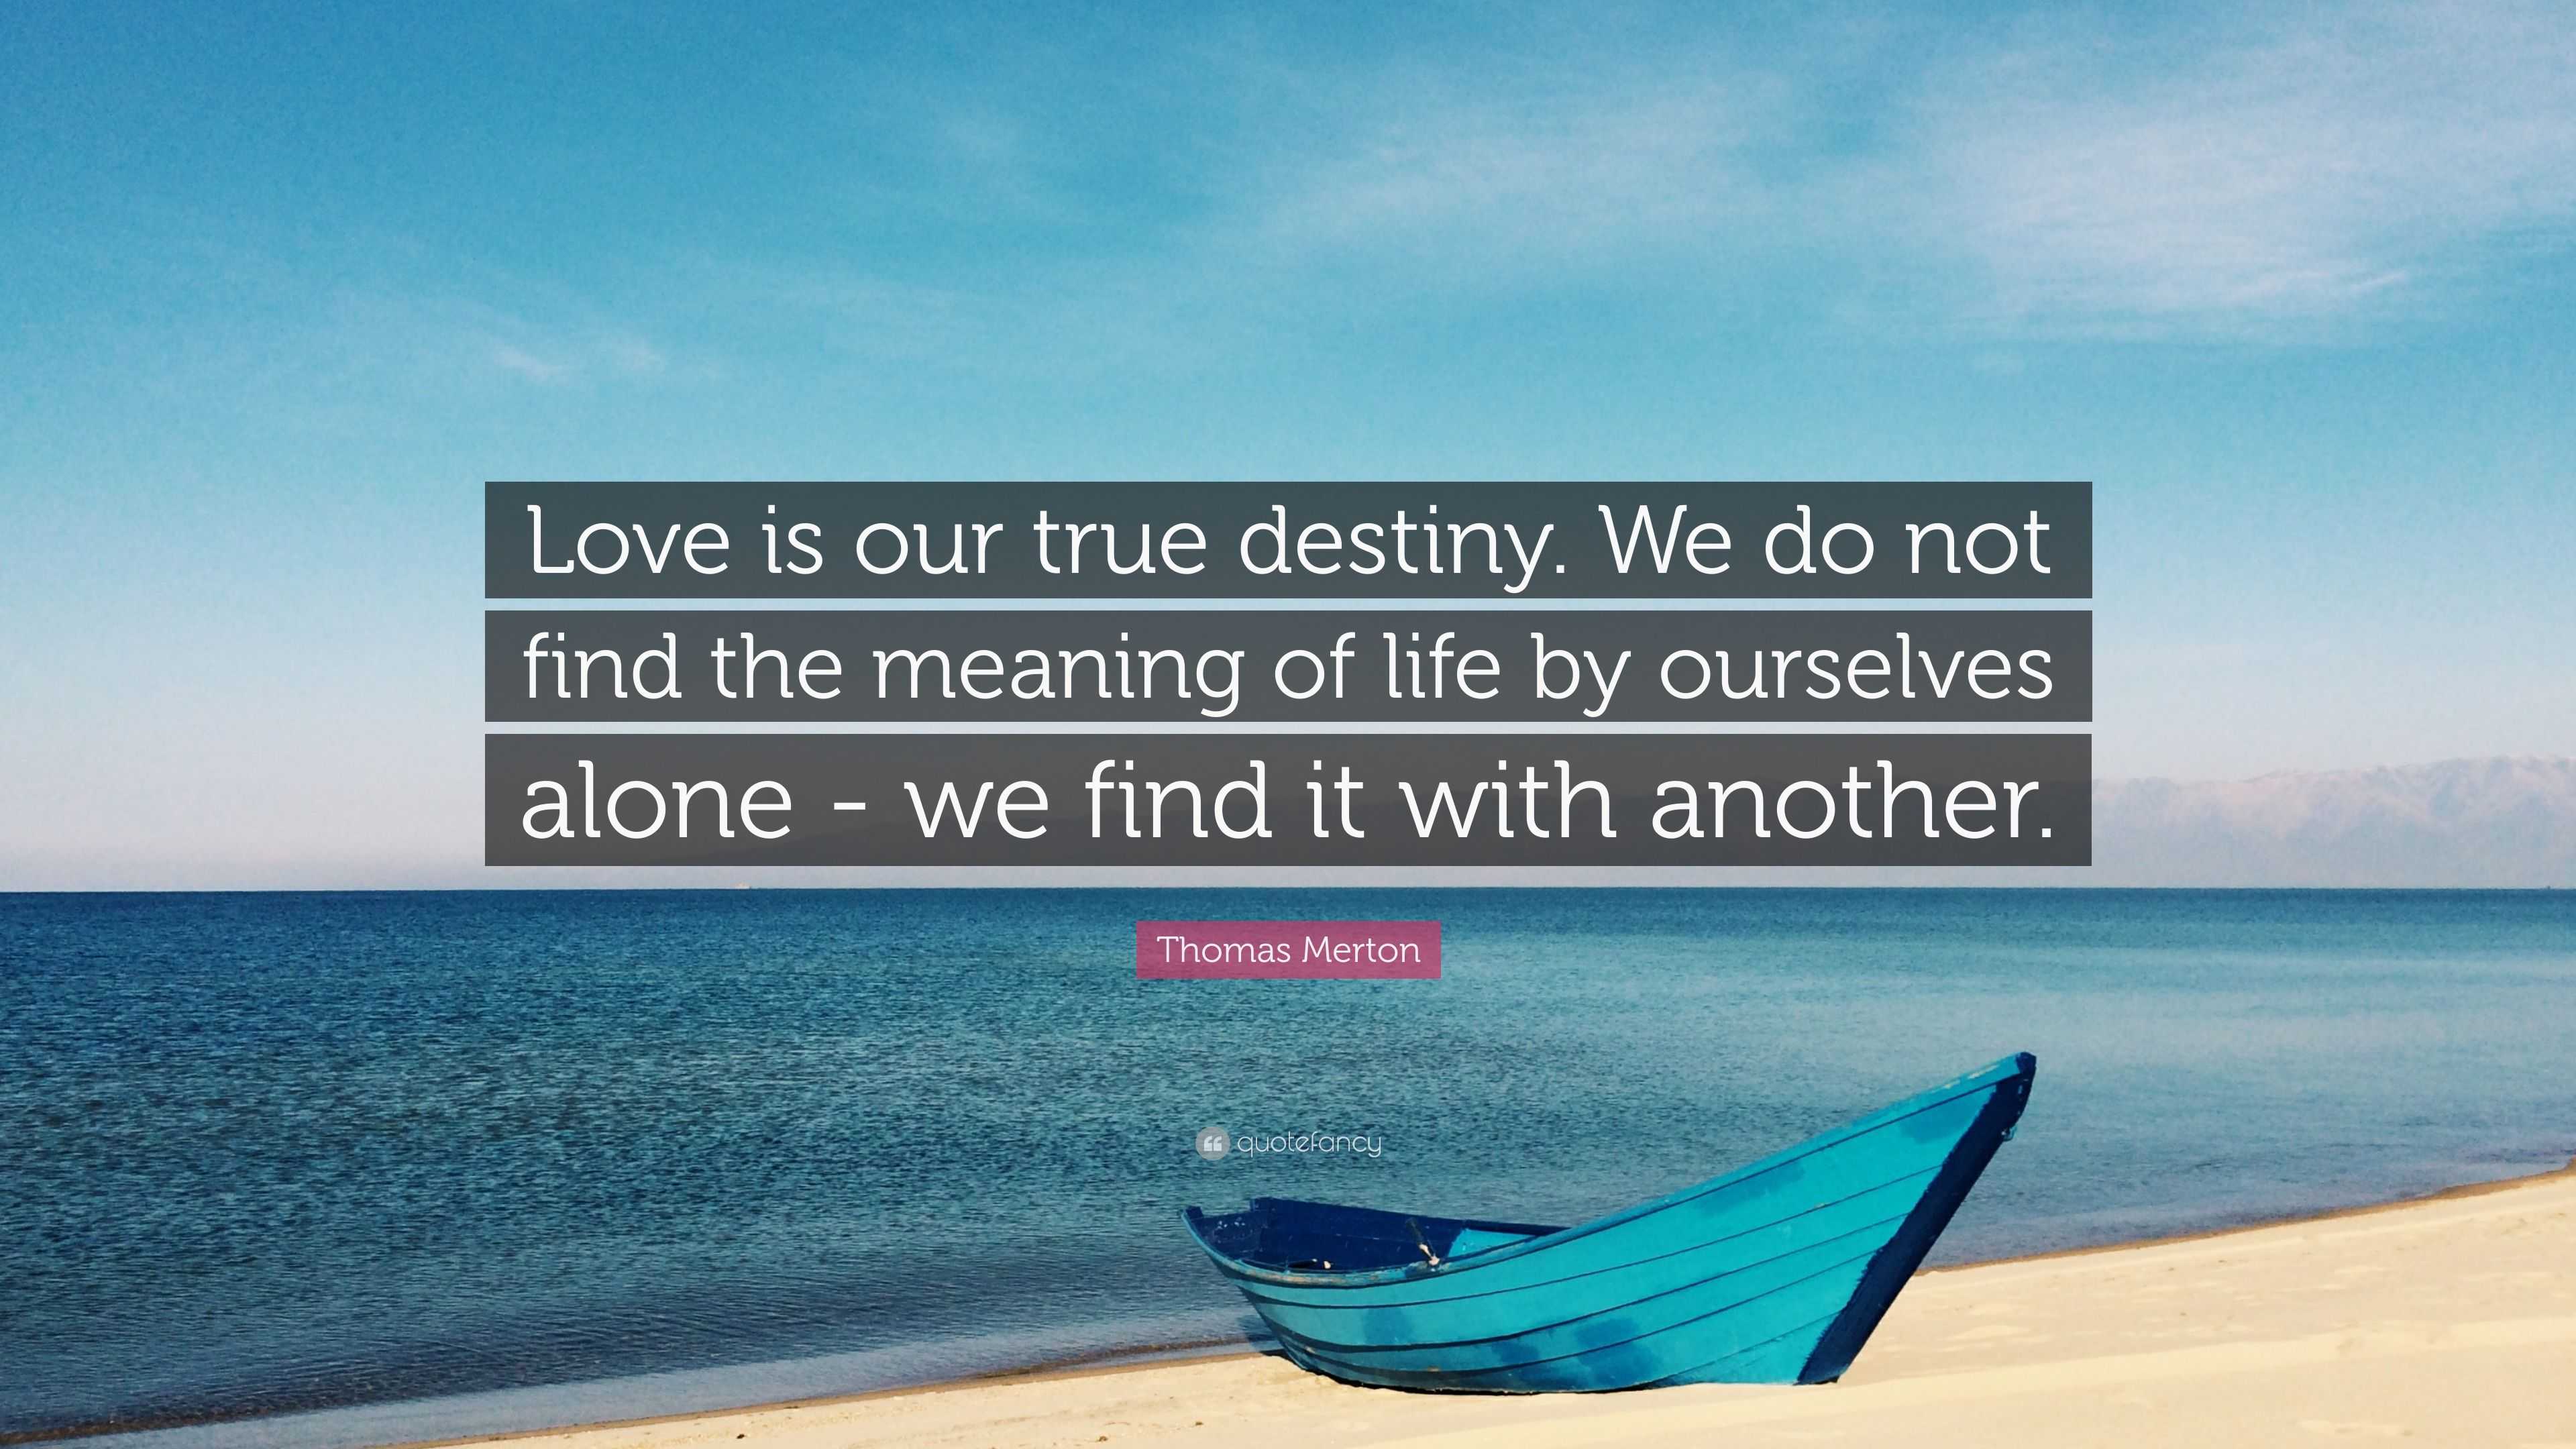 Thomas Merton Quote: "Love is our true destiny. We do not find the meaning of life by ourselves ...